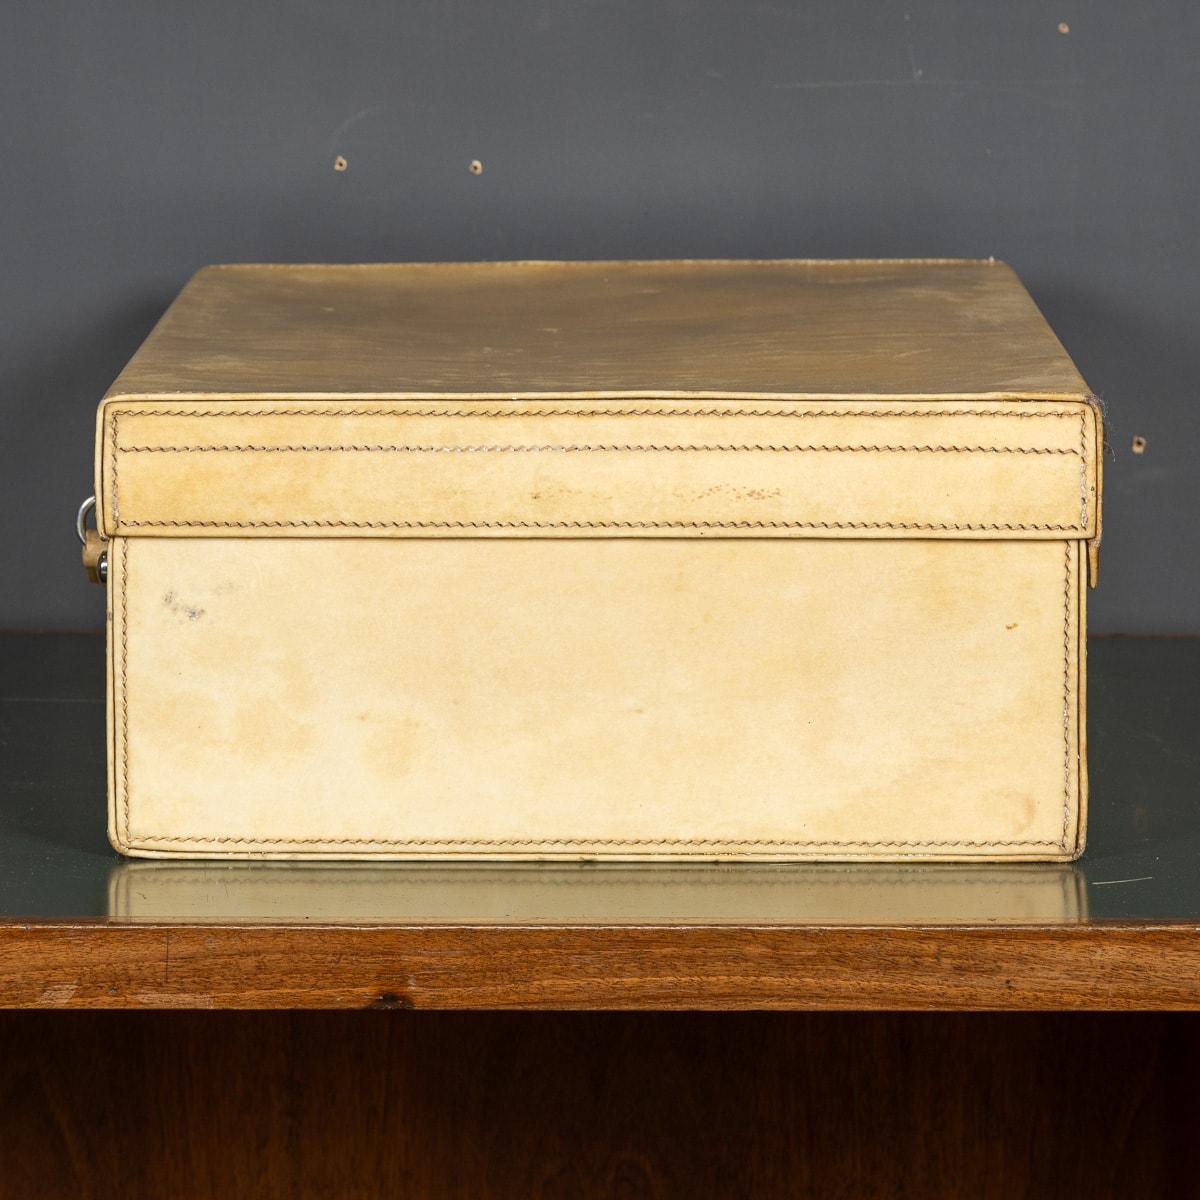 Antique 20th Century Vellum Overnight Case By Royal Doulton c.1920 In Good Condition For Sale In Royal Tunbridge Wells, Kent